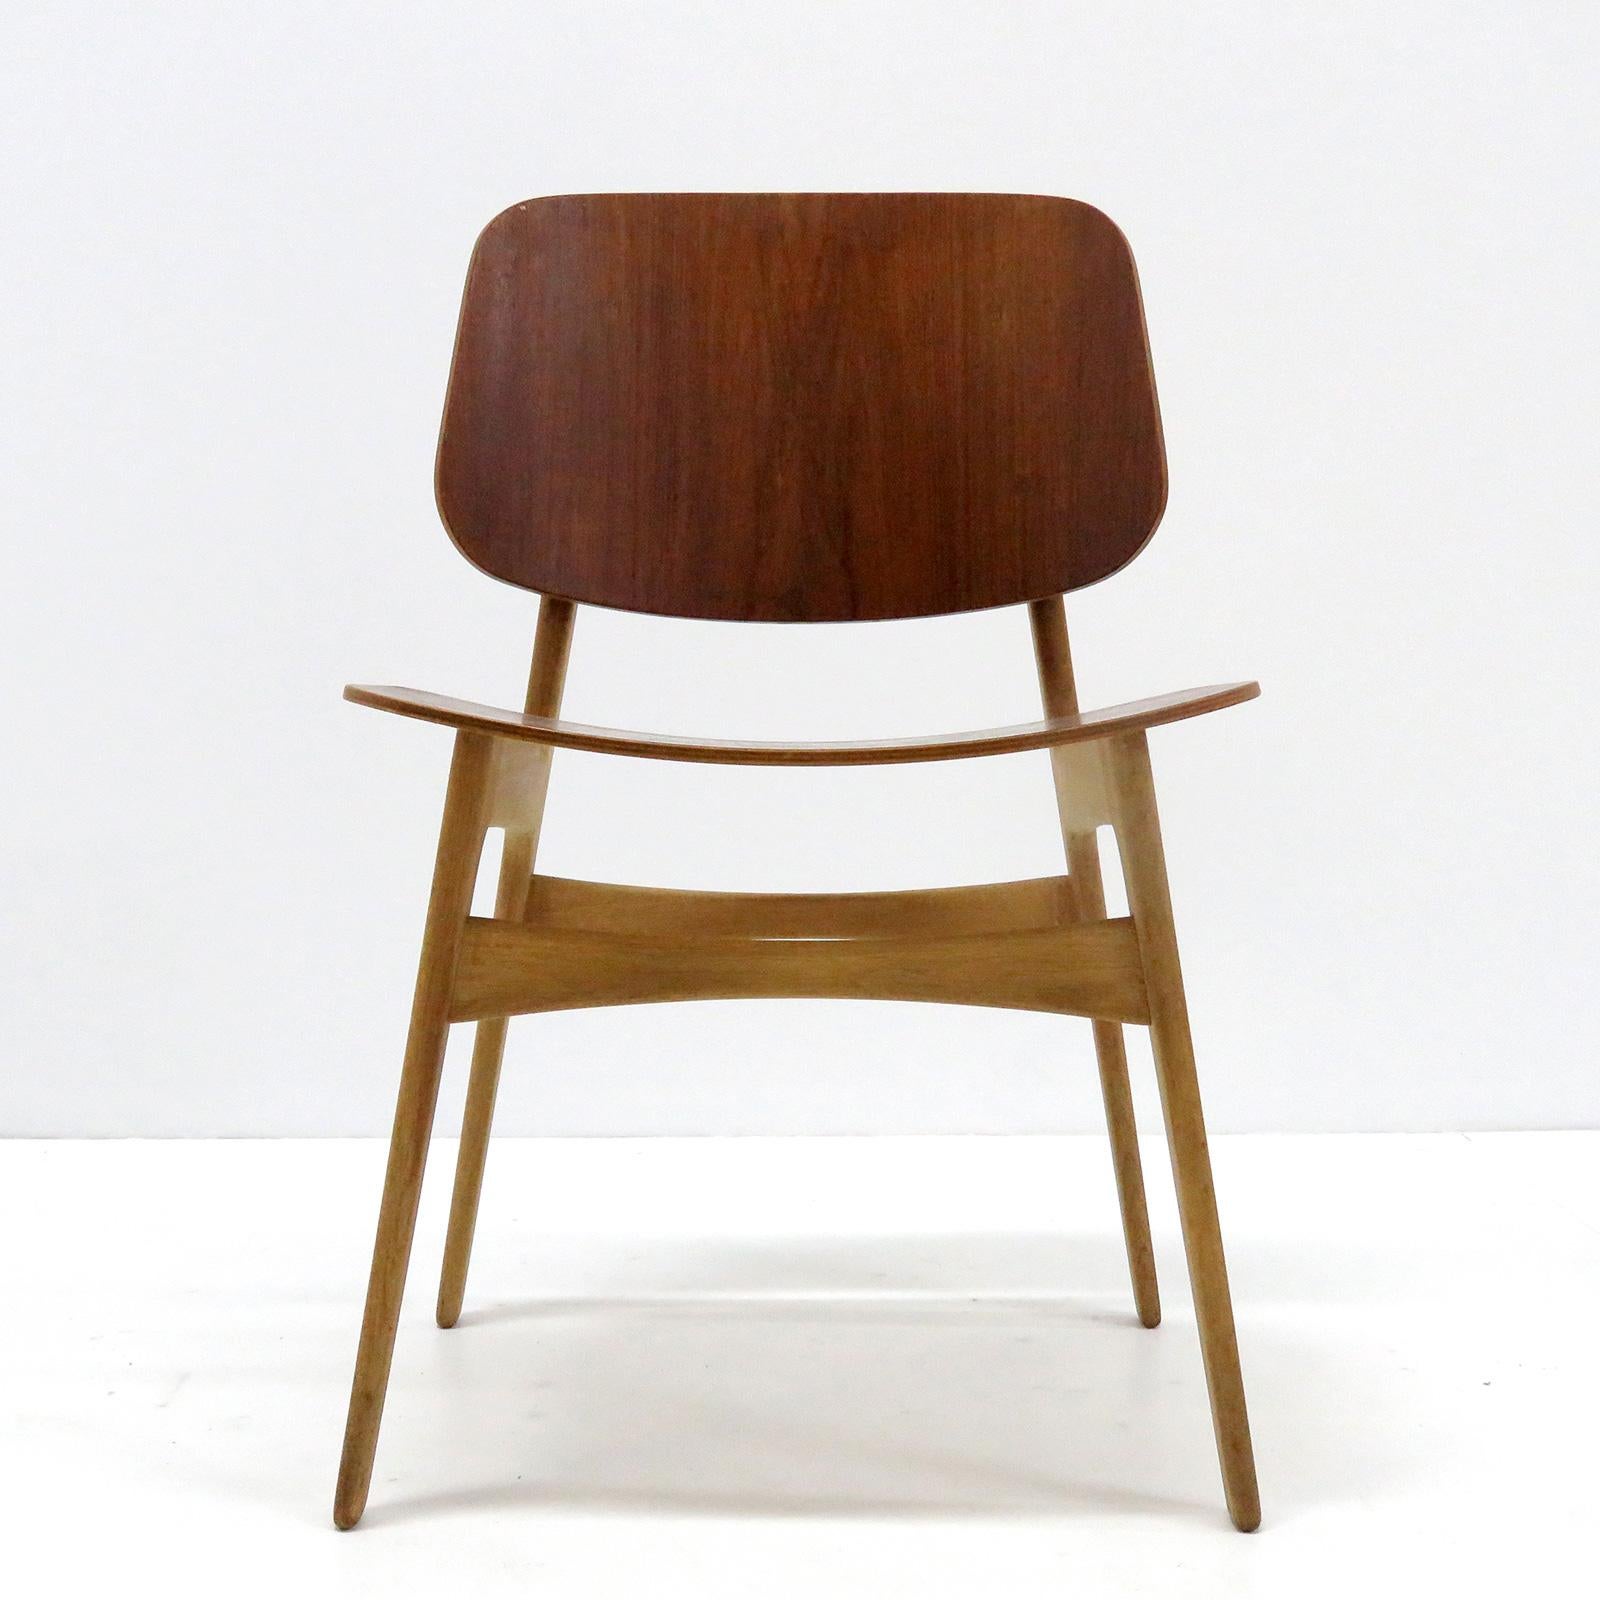 Wonderful 'Søborg' model 122 dining chairs by Børge Mogensen for Søborg Møbler with teak plywood shell seats and back rests on a beechwood frame in wonderful condition. Priced individually.